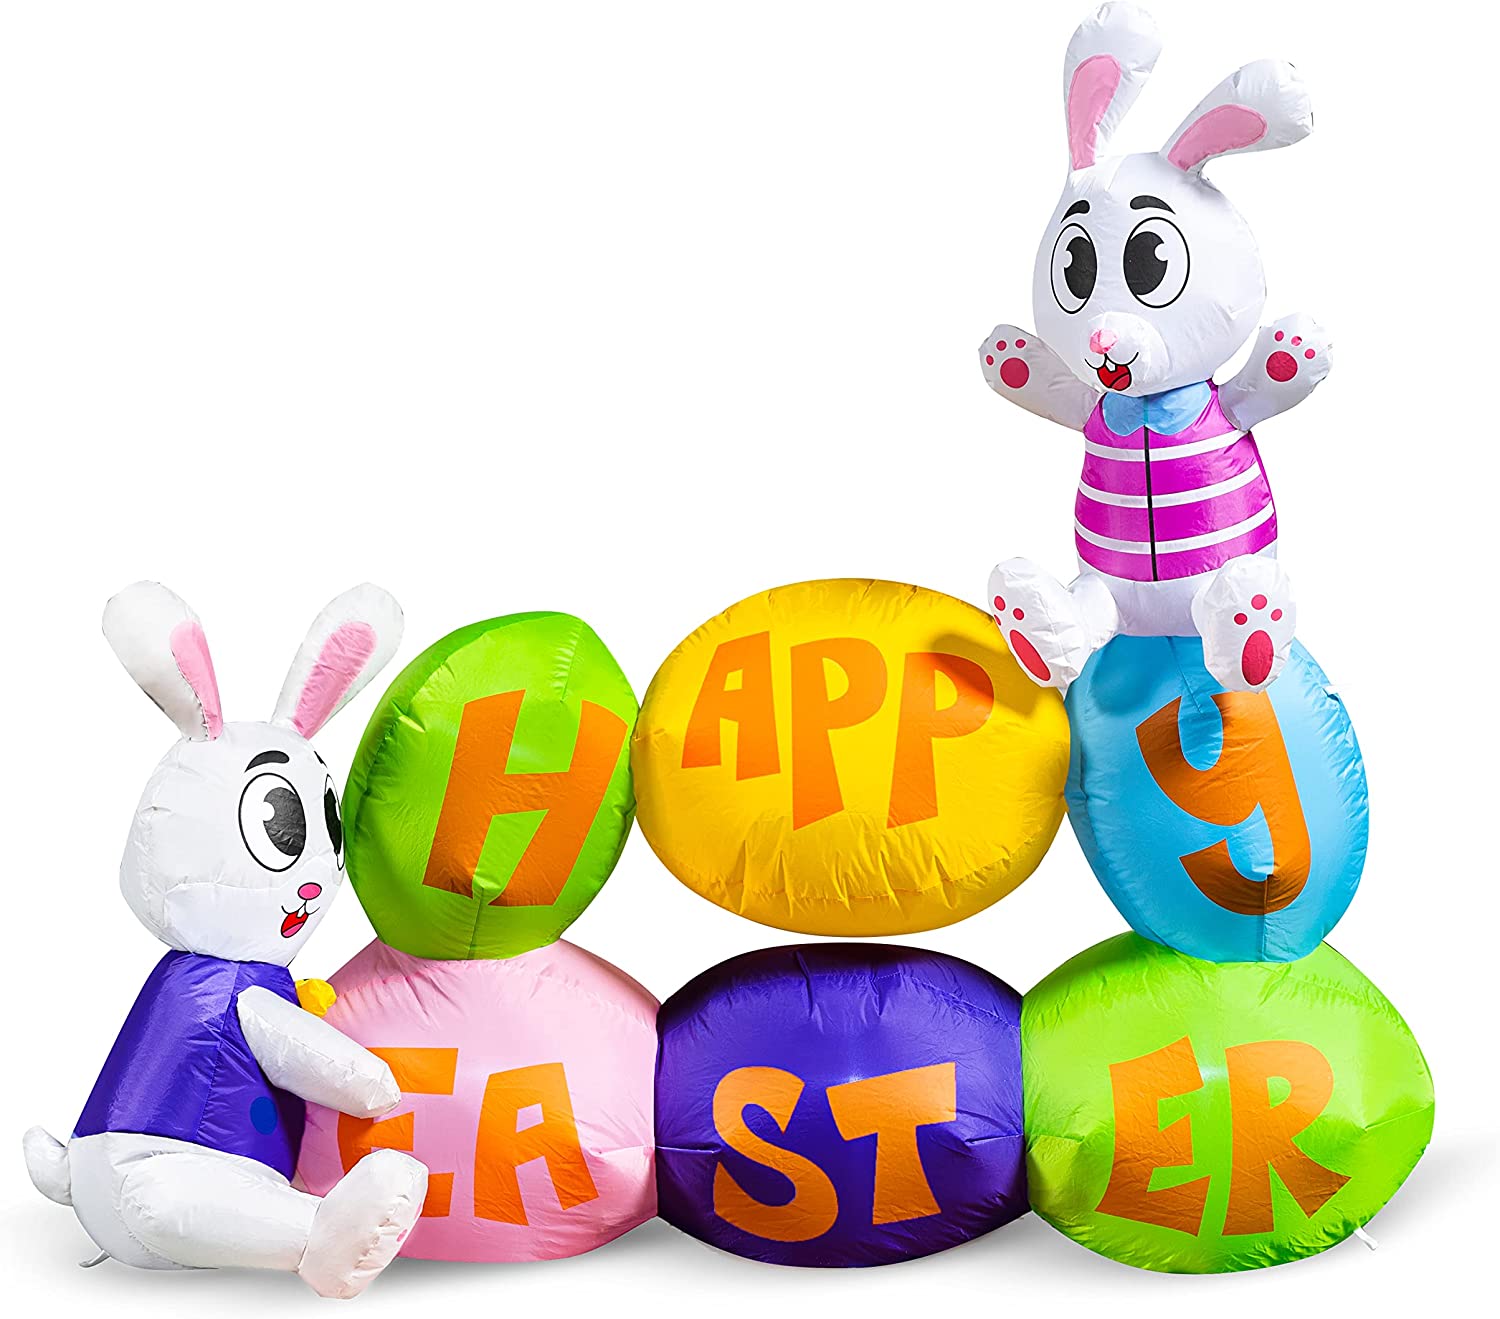 You are currently viewing What are some budget-friendly ways to decorate for an Easter celebration?